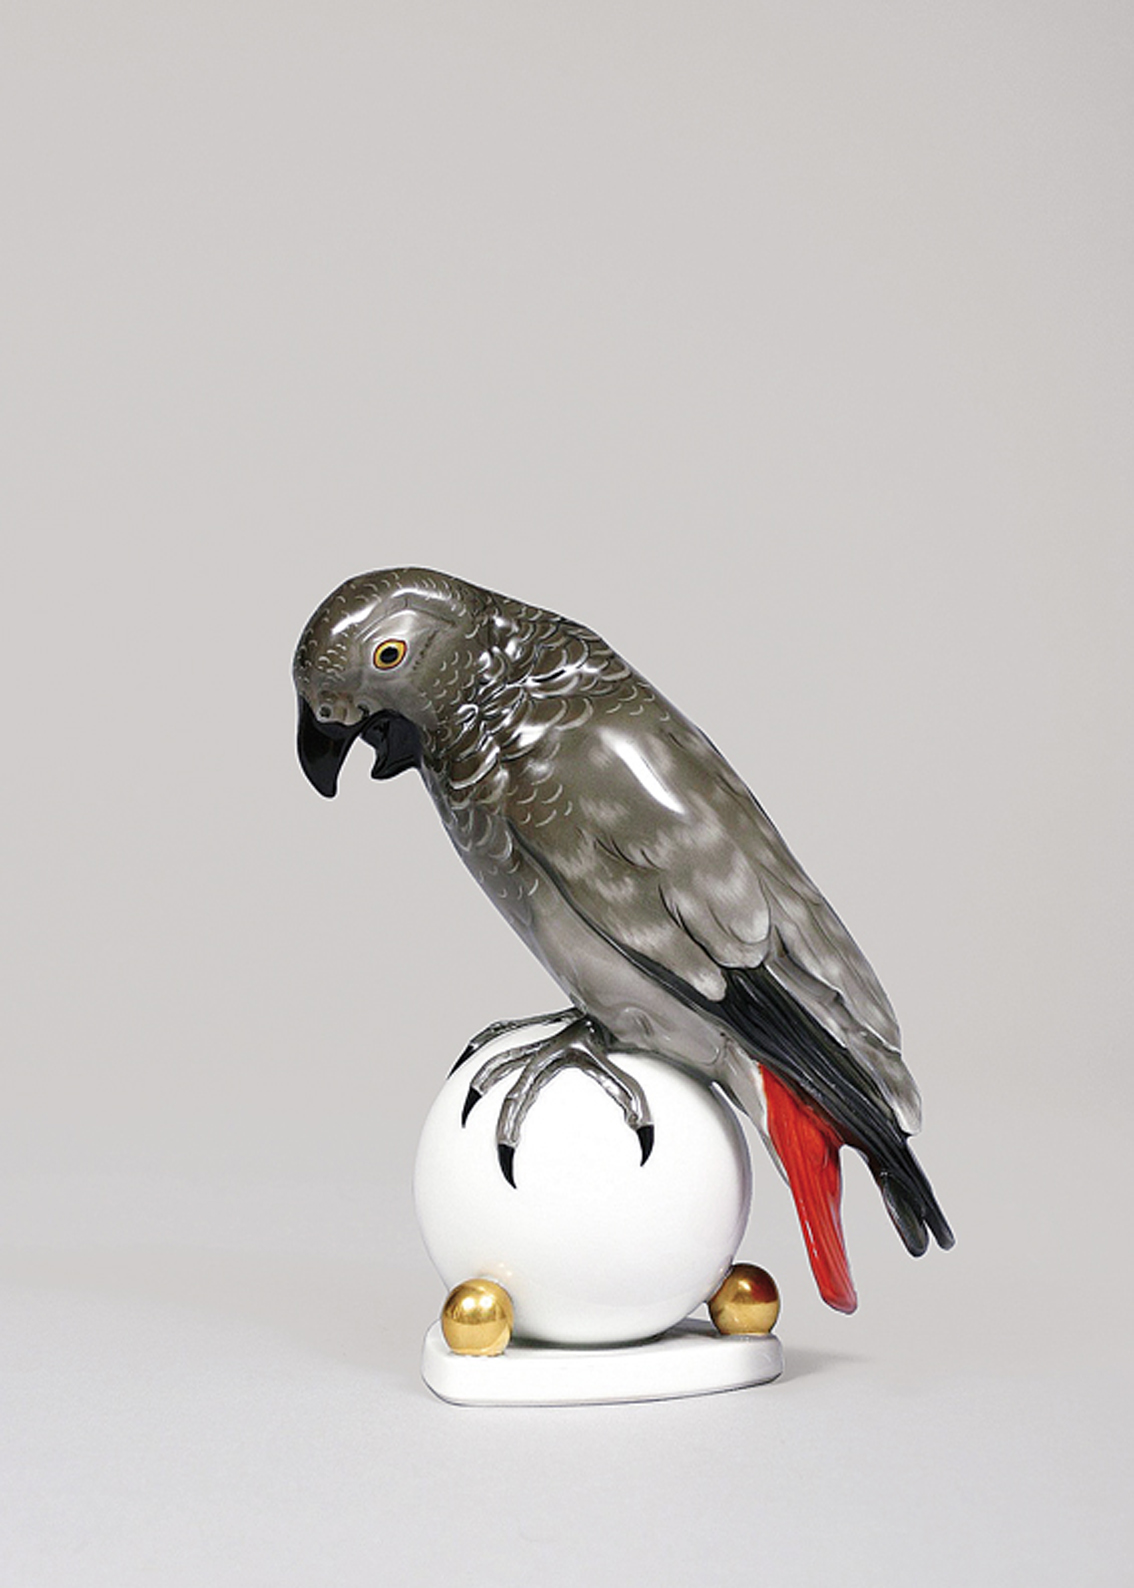 An animal figure of a grey parrot seated on a ball